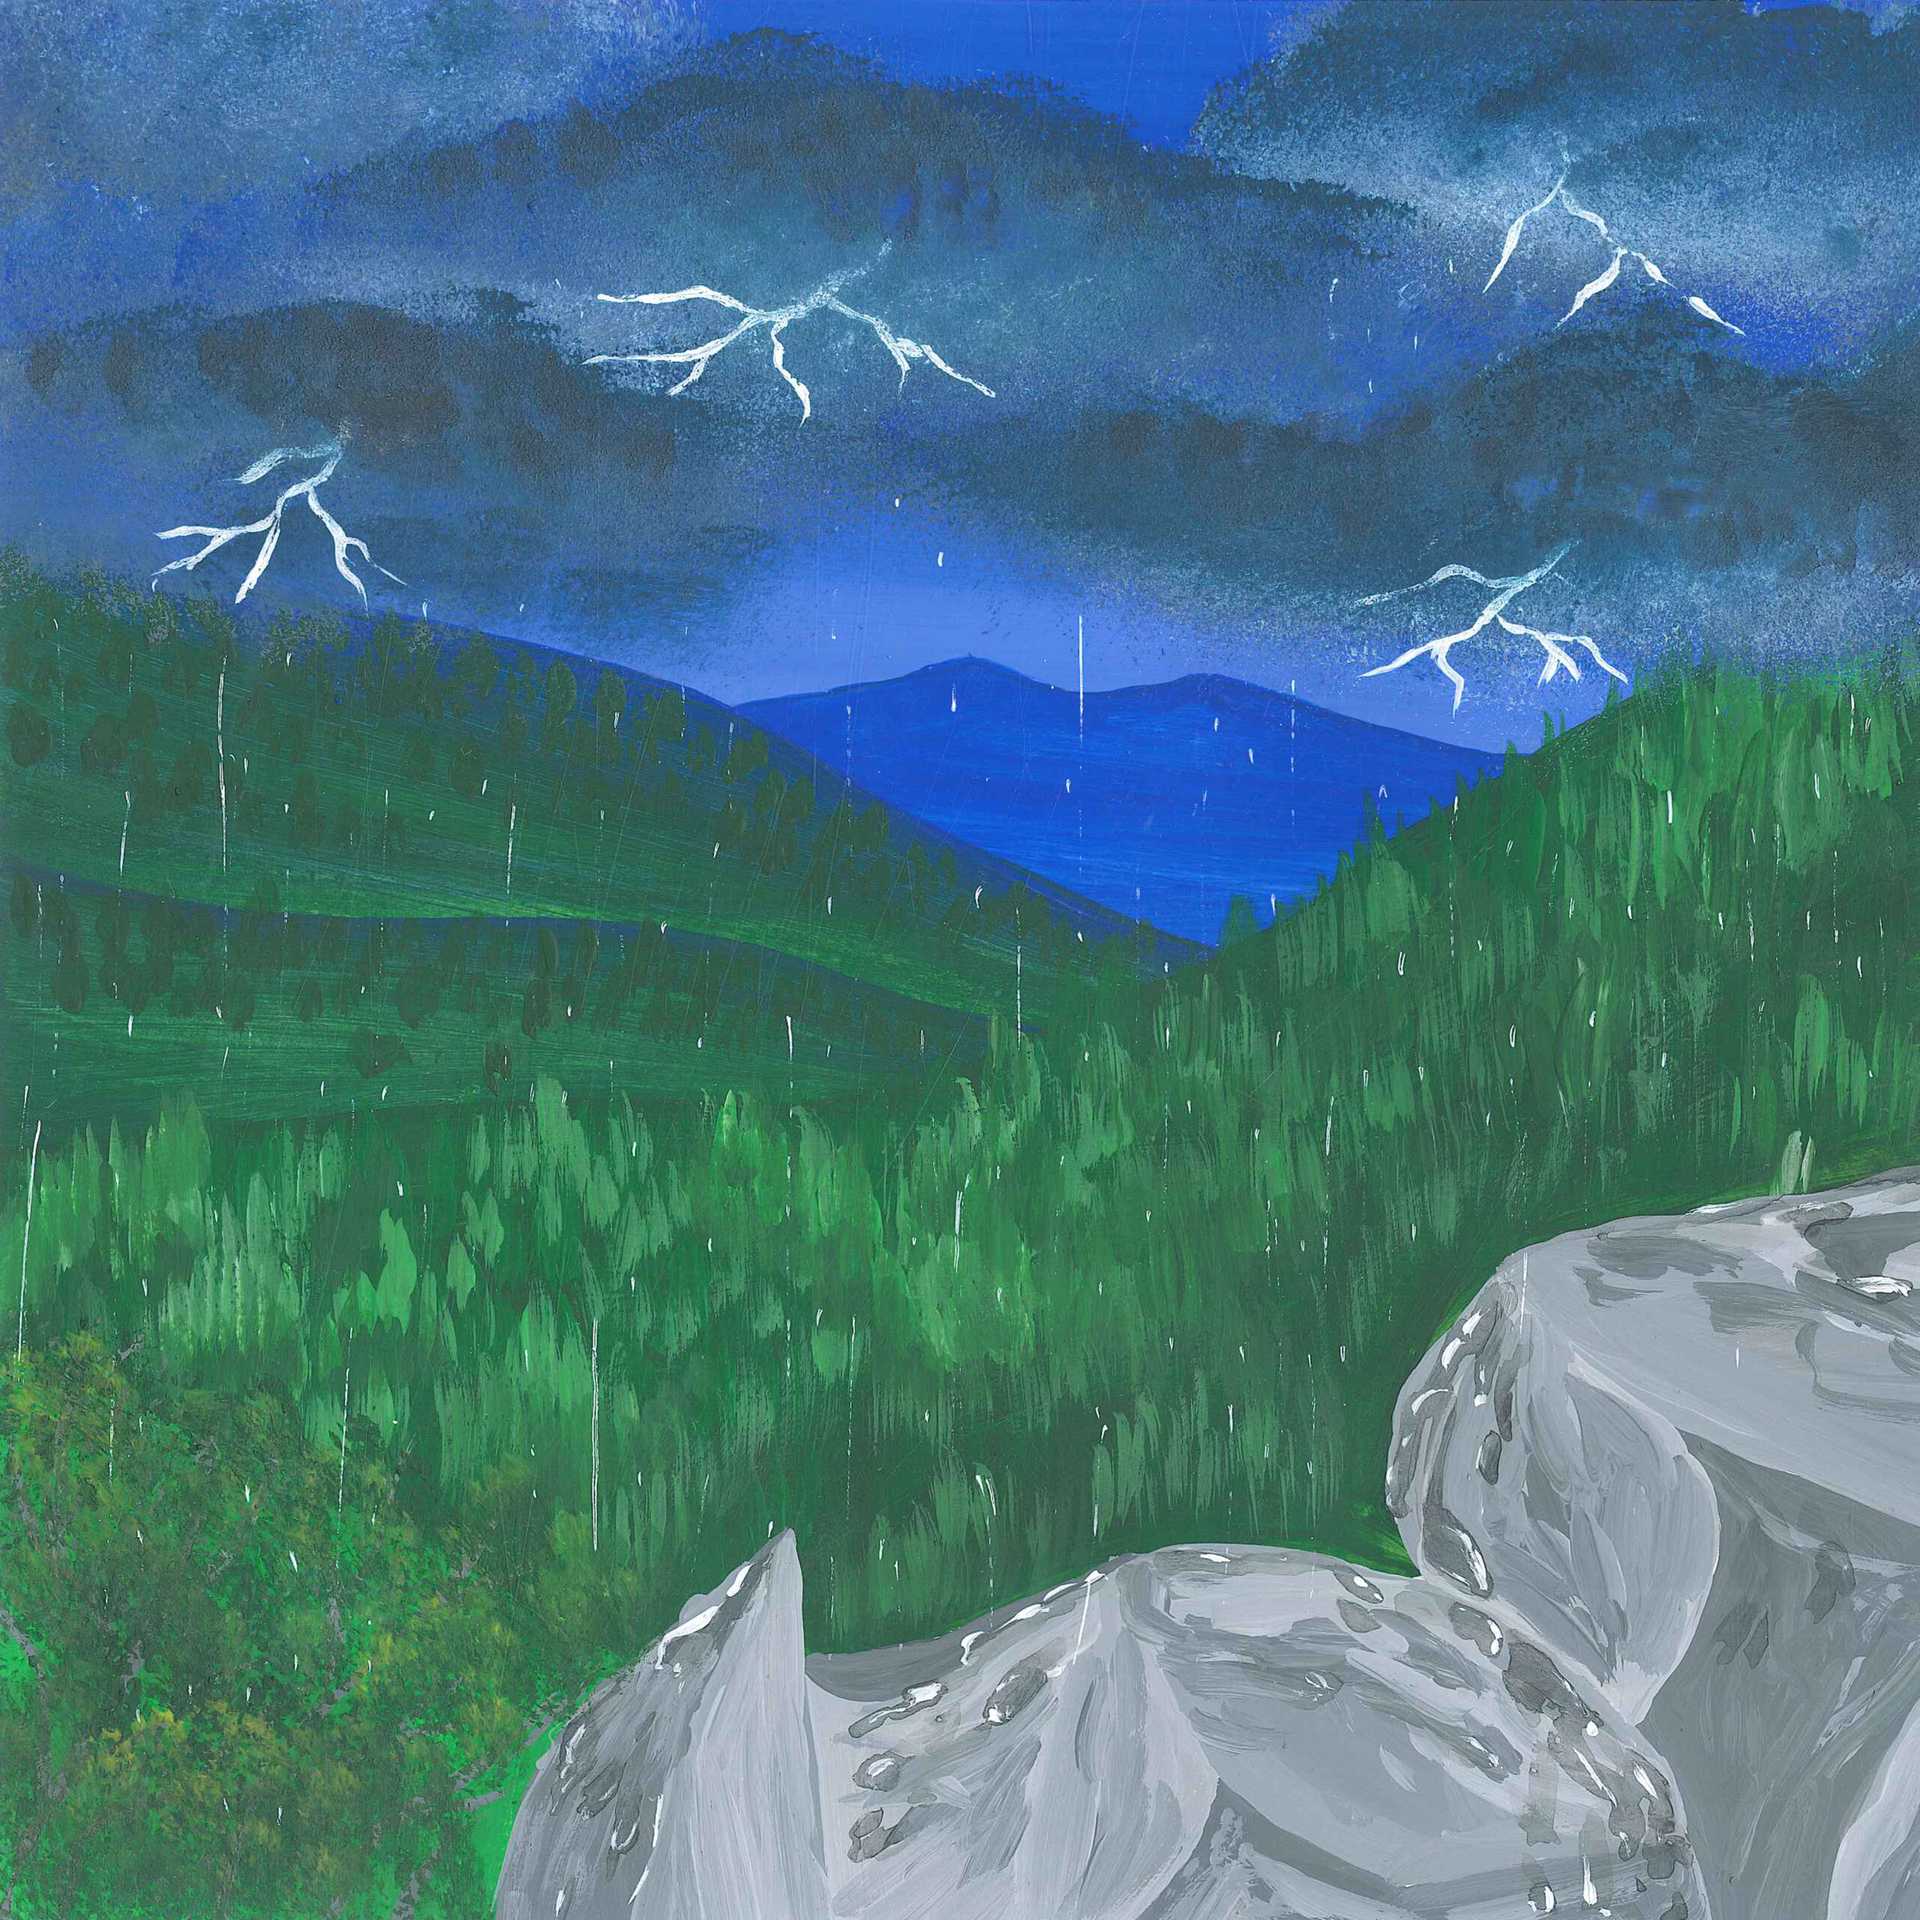 Mountain Thunderstorm - nature landscape painting - earth.fm